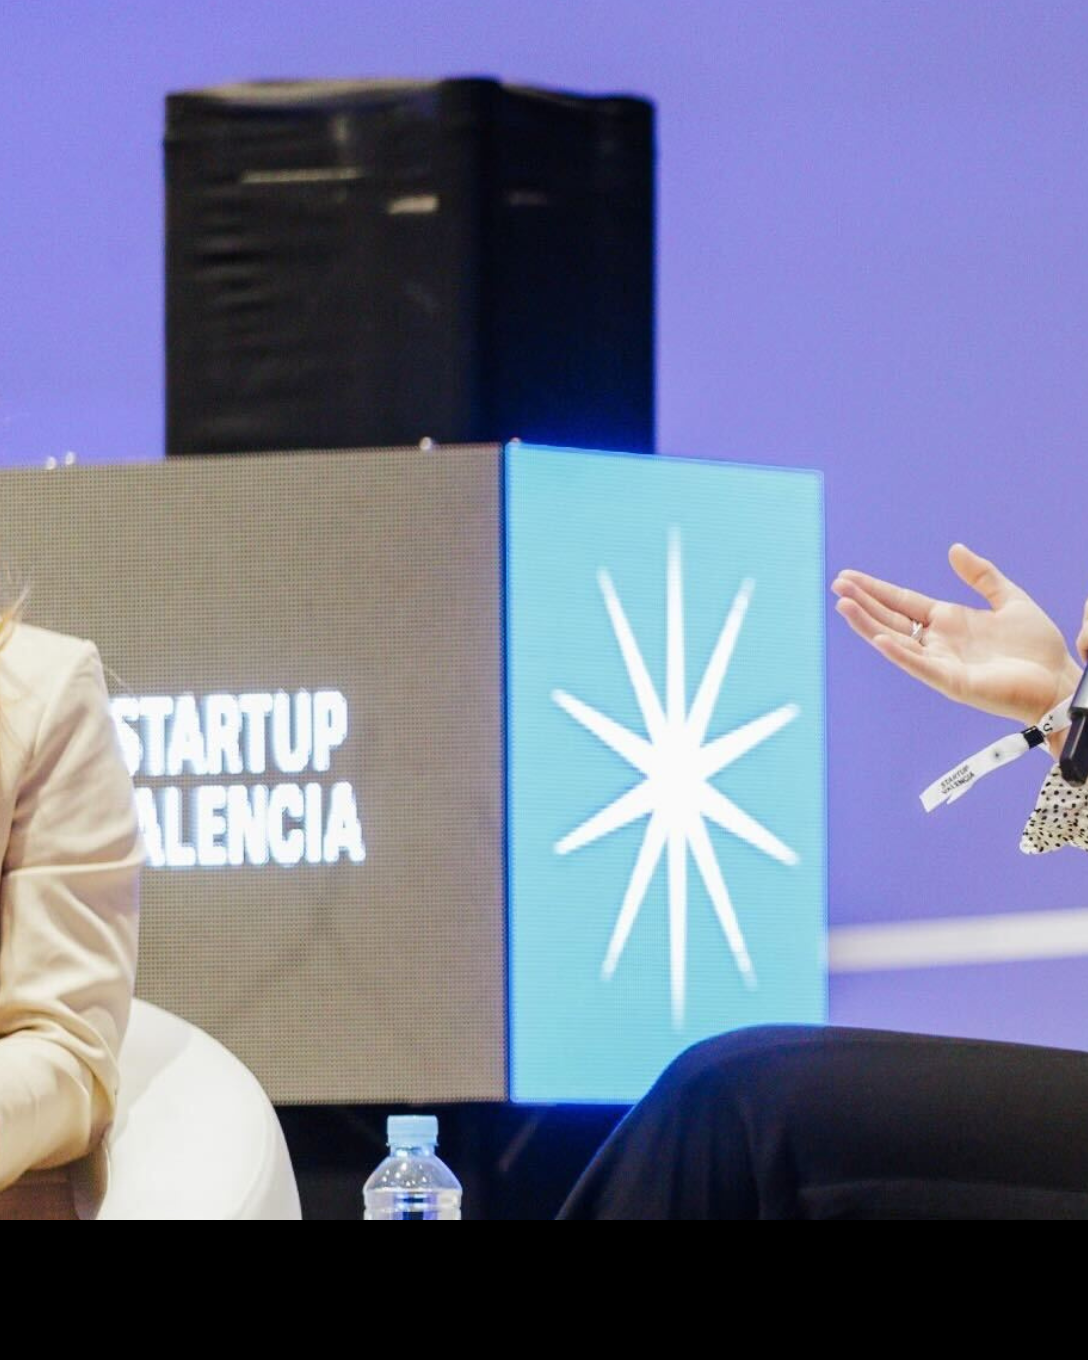 startups founded by women